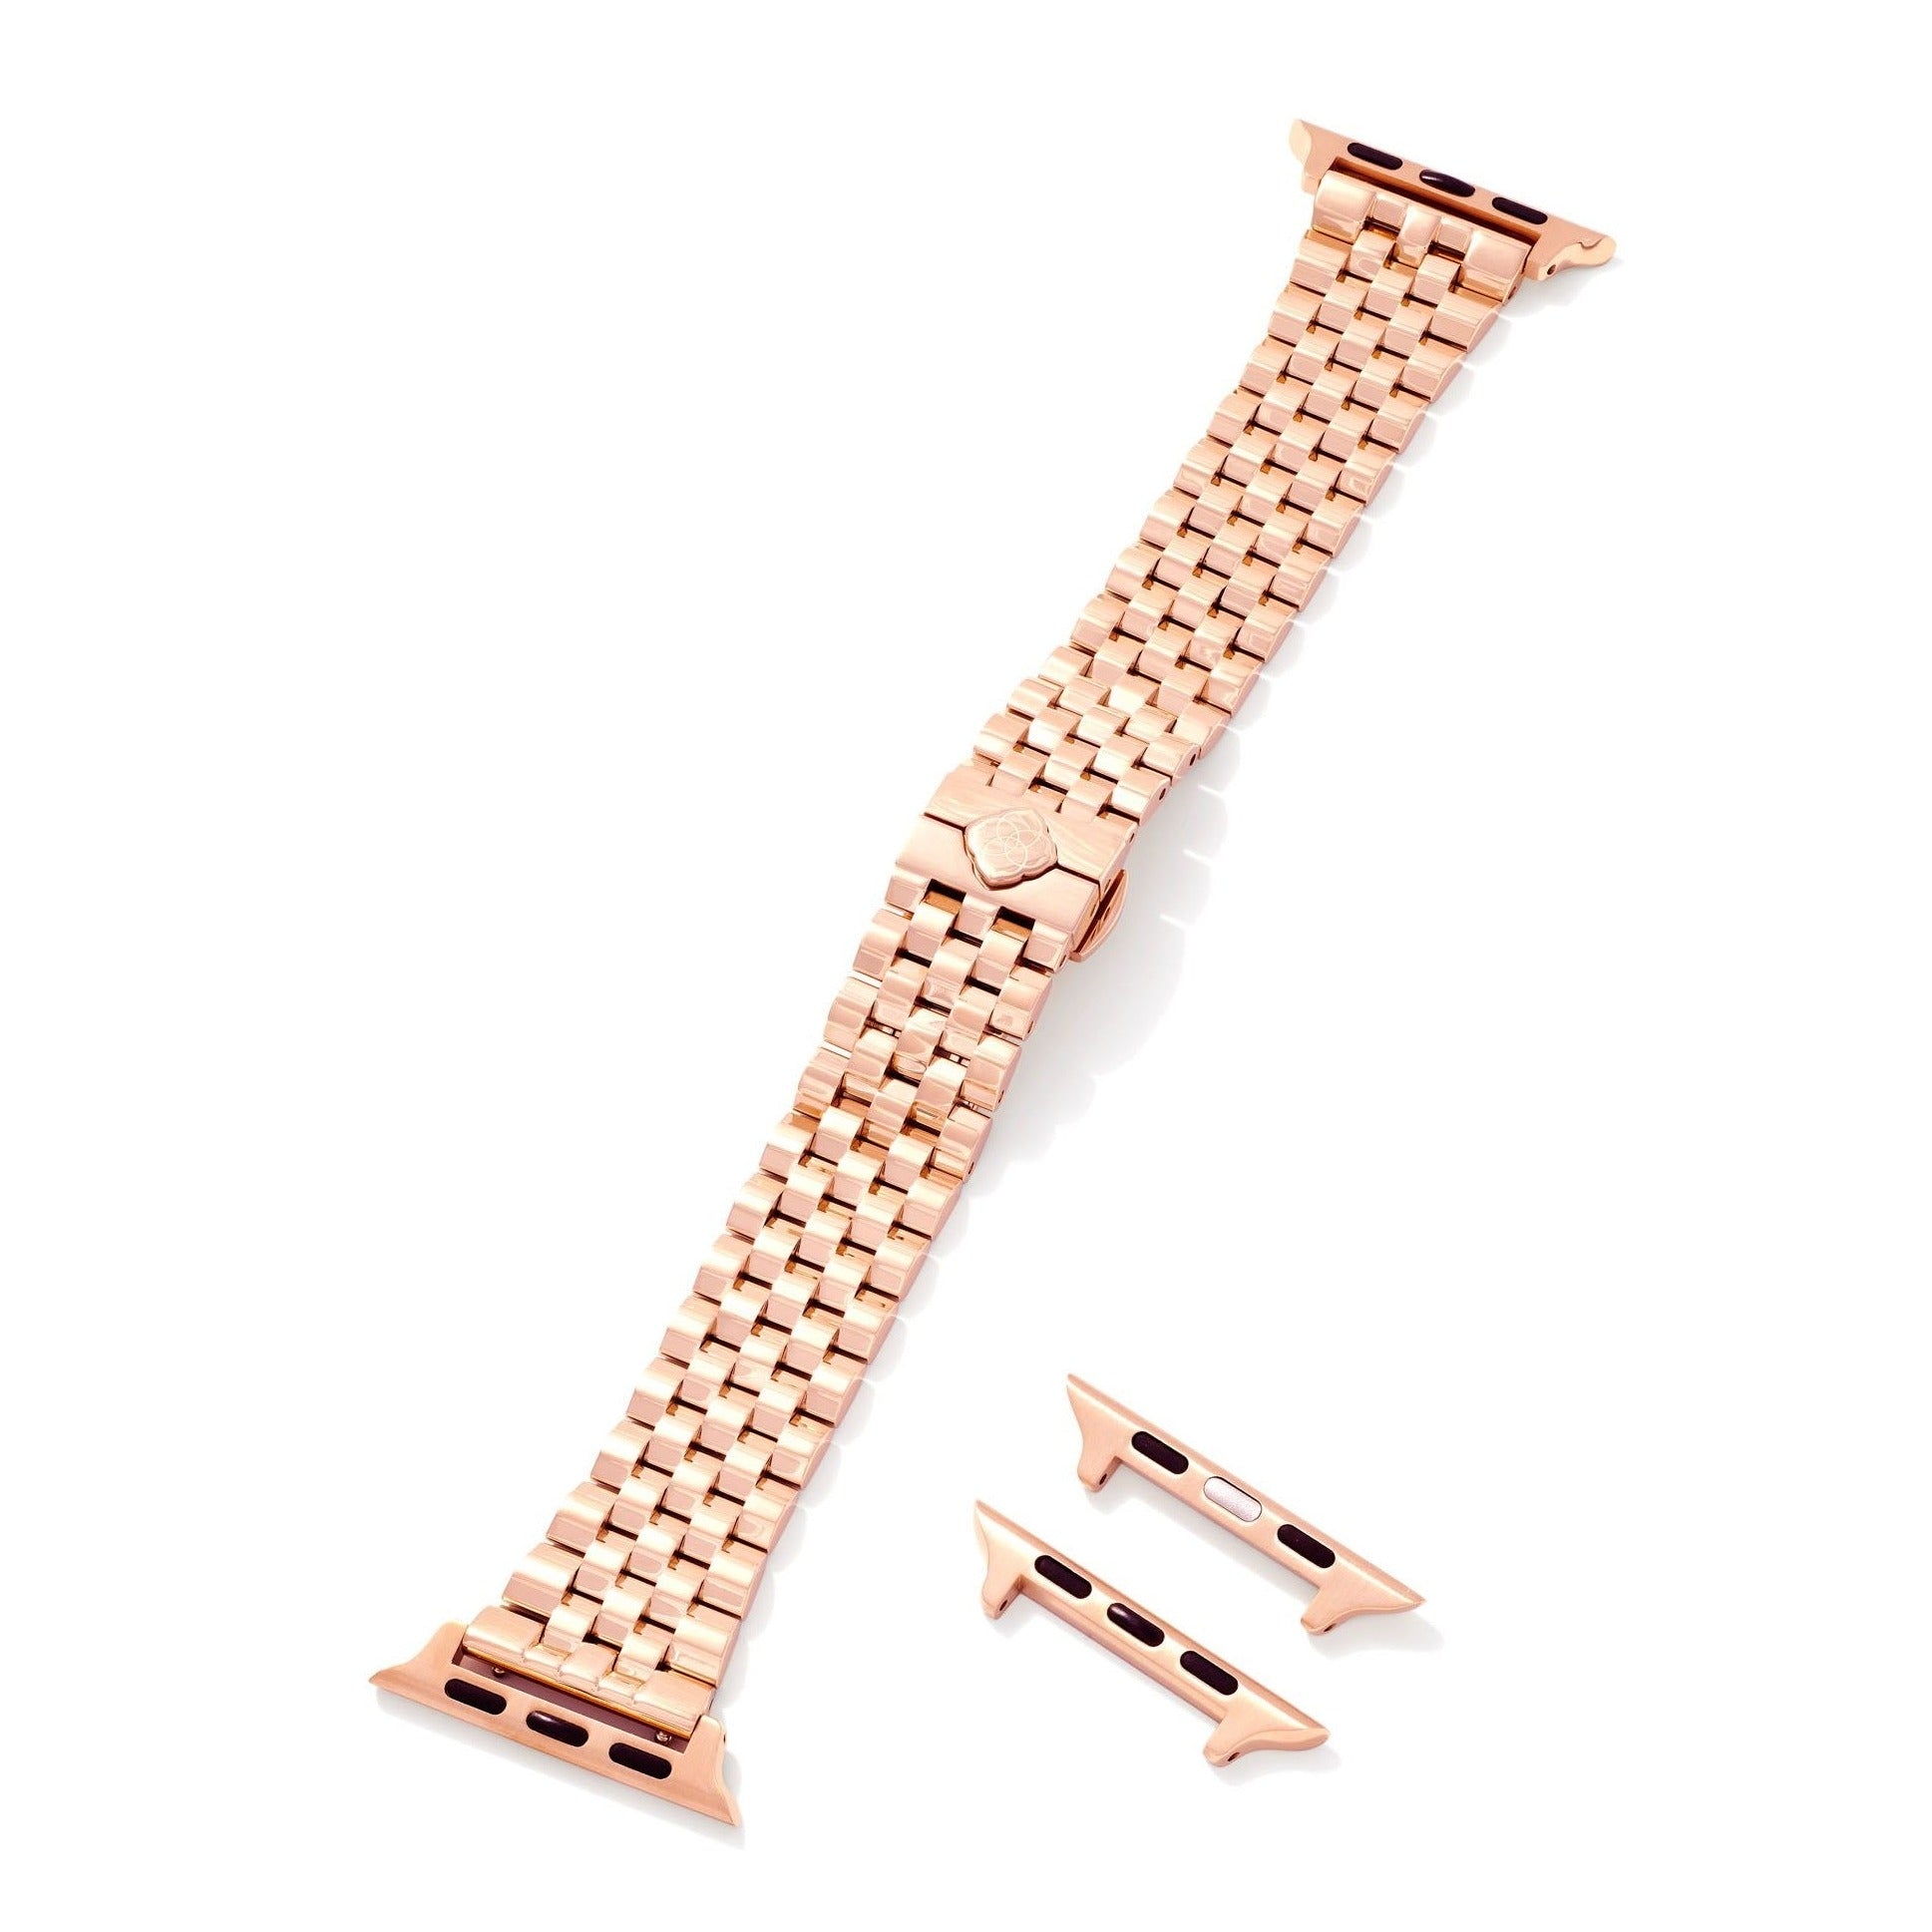 Kendra Scott | Alex 5 Link Watch Band in Rose Gold Tone Stainless Steel